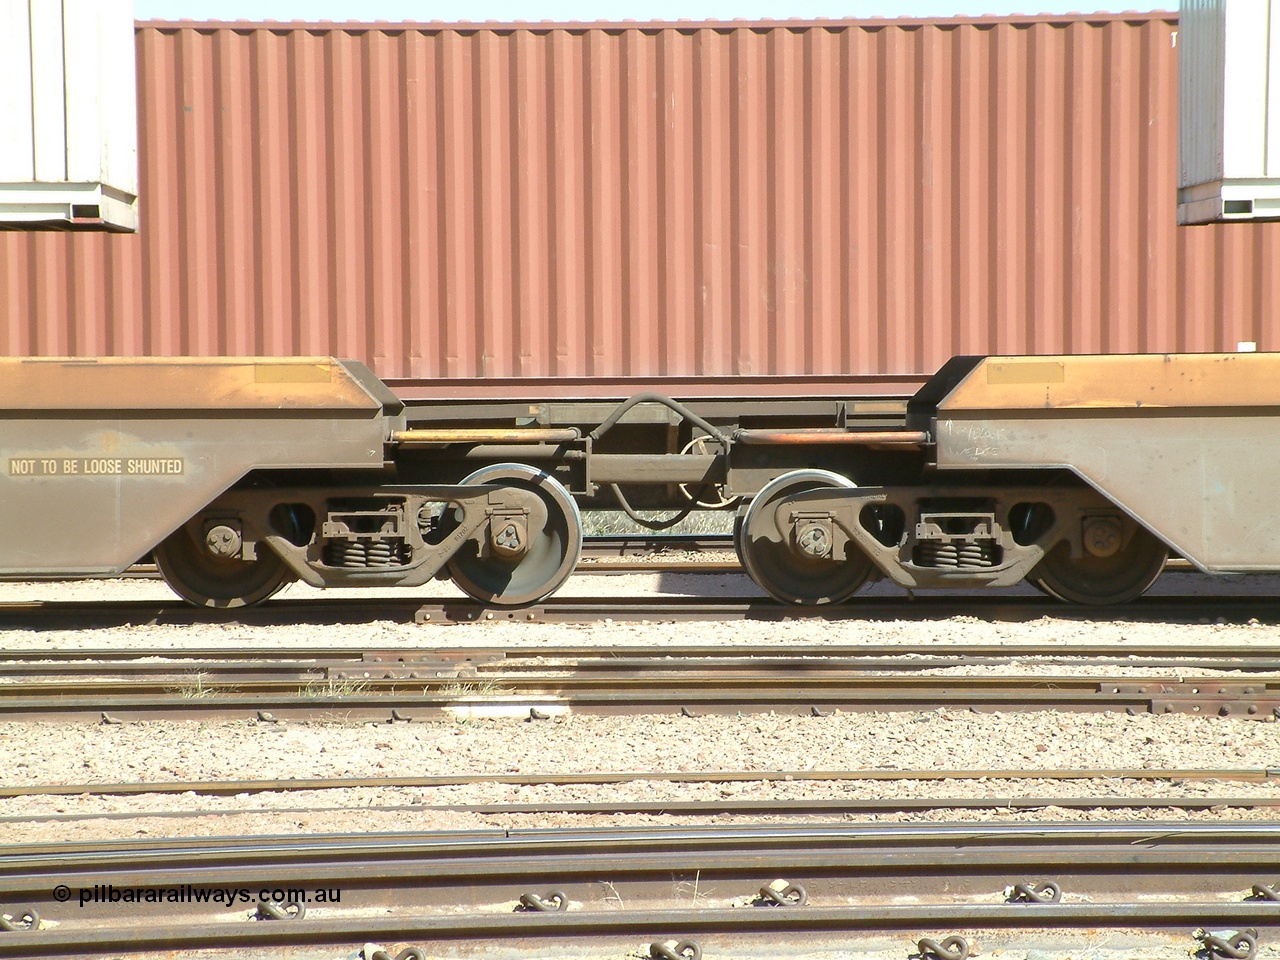 030404 104454
Port Augusta, Spencer Junction yard, RQZY type five unit bar coupled well container waggon RQZY 7050 built as one of a batch of thirty two by Goninan NSW for National Rail, detail of the bar coupling arrangement. 4th April, 2003.
Keywords: RQZY-type;RQZY7050;1995-96/32-16;Goninan-NSW;